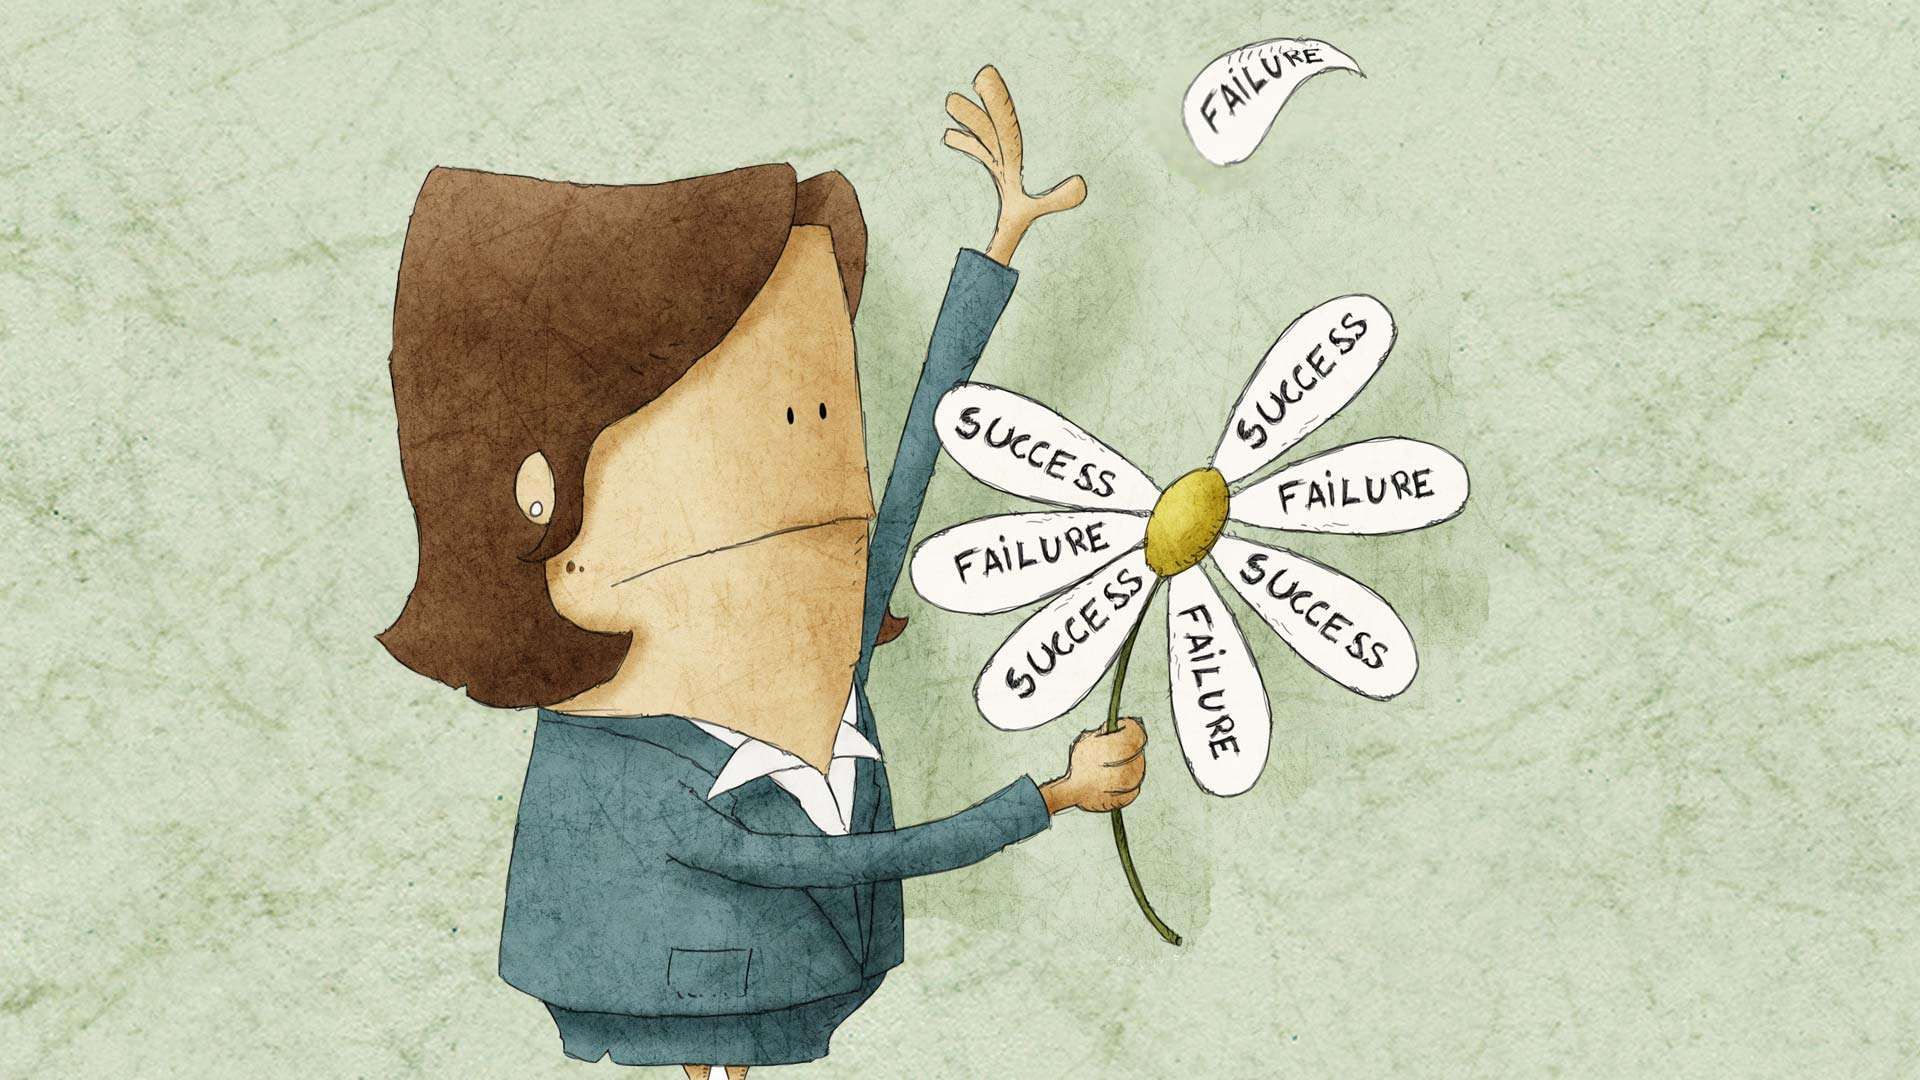 illustrative drawing of success and failure